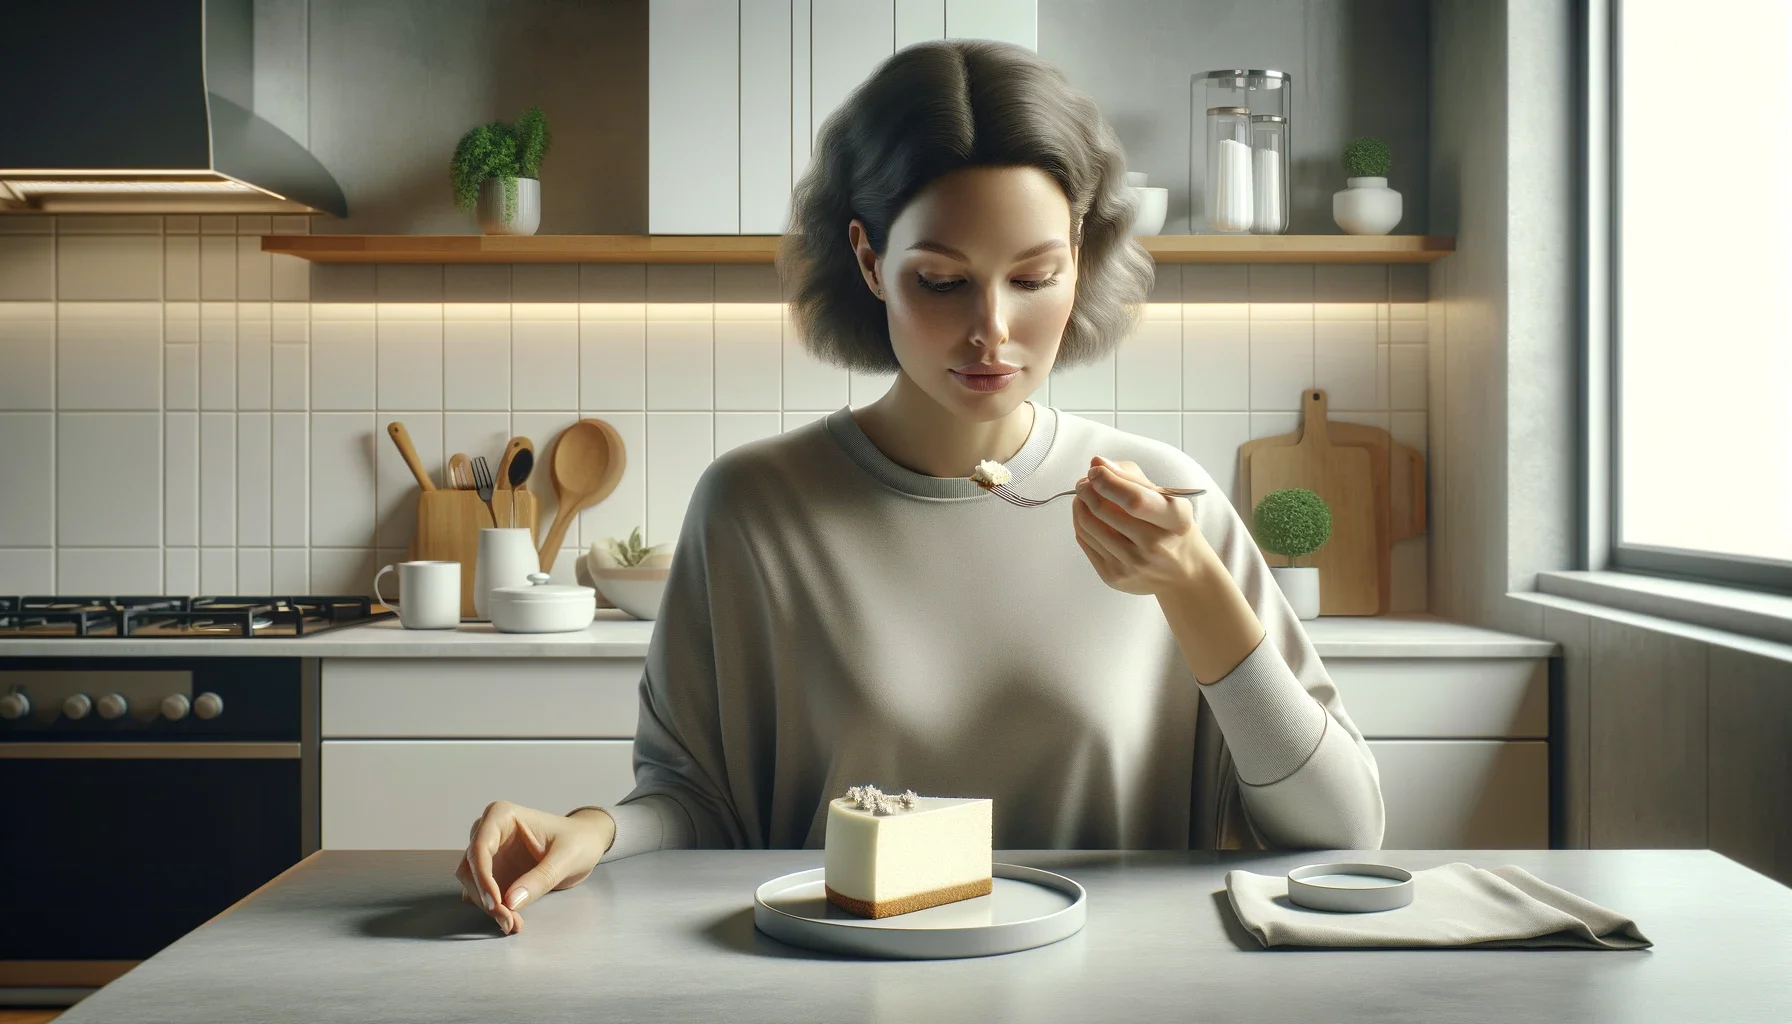 Woman contemplating if she should eat cheesecake in a kitchen.